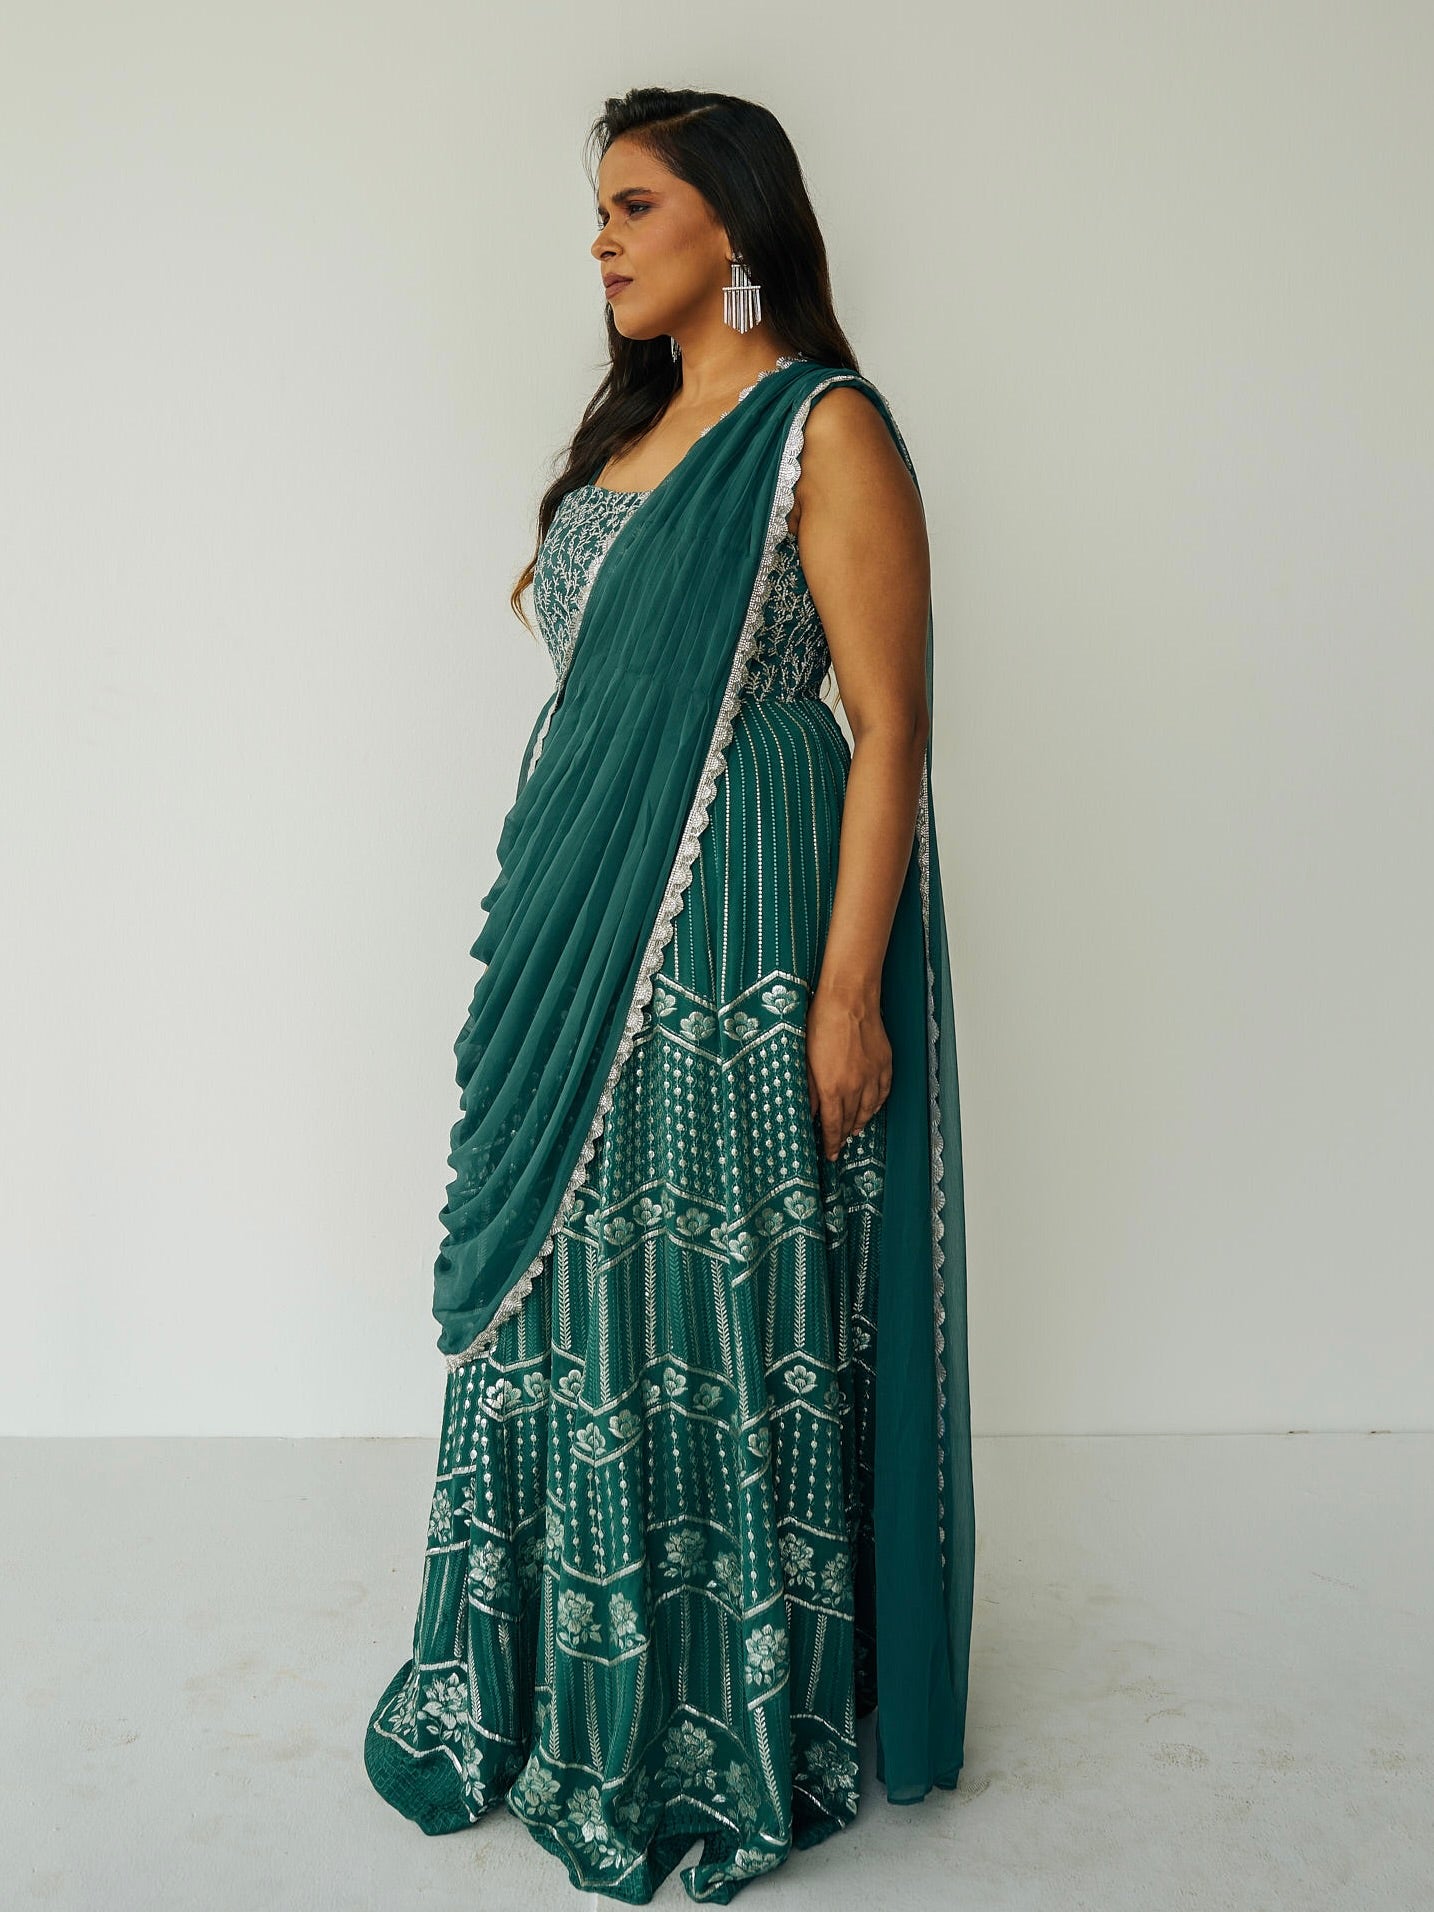 The Anjali Anarkali in green features metallic layered embroidery and is paired with an attached dupatta (so you can't lose or trip on it).